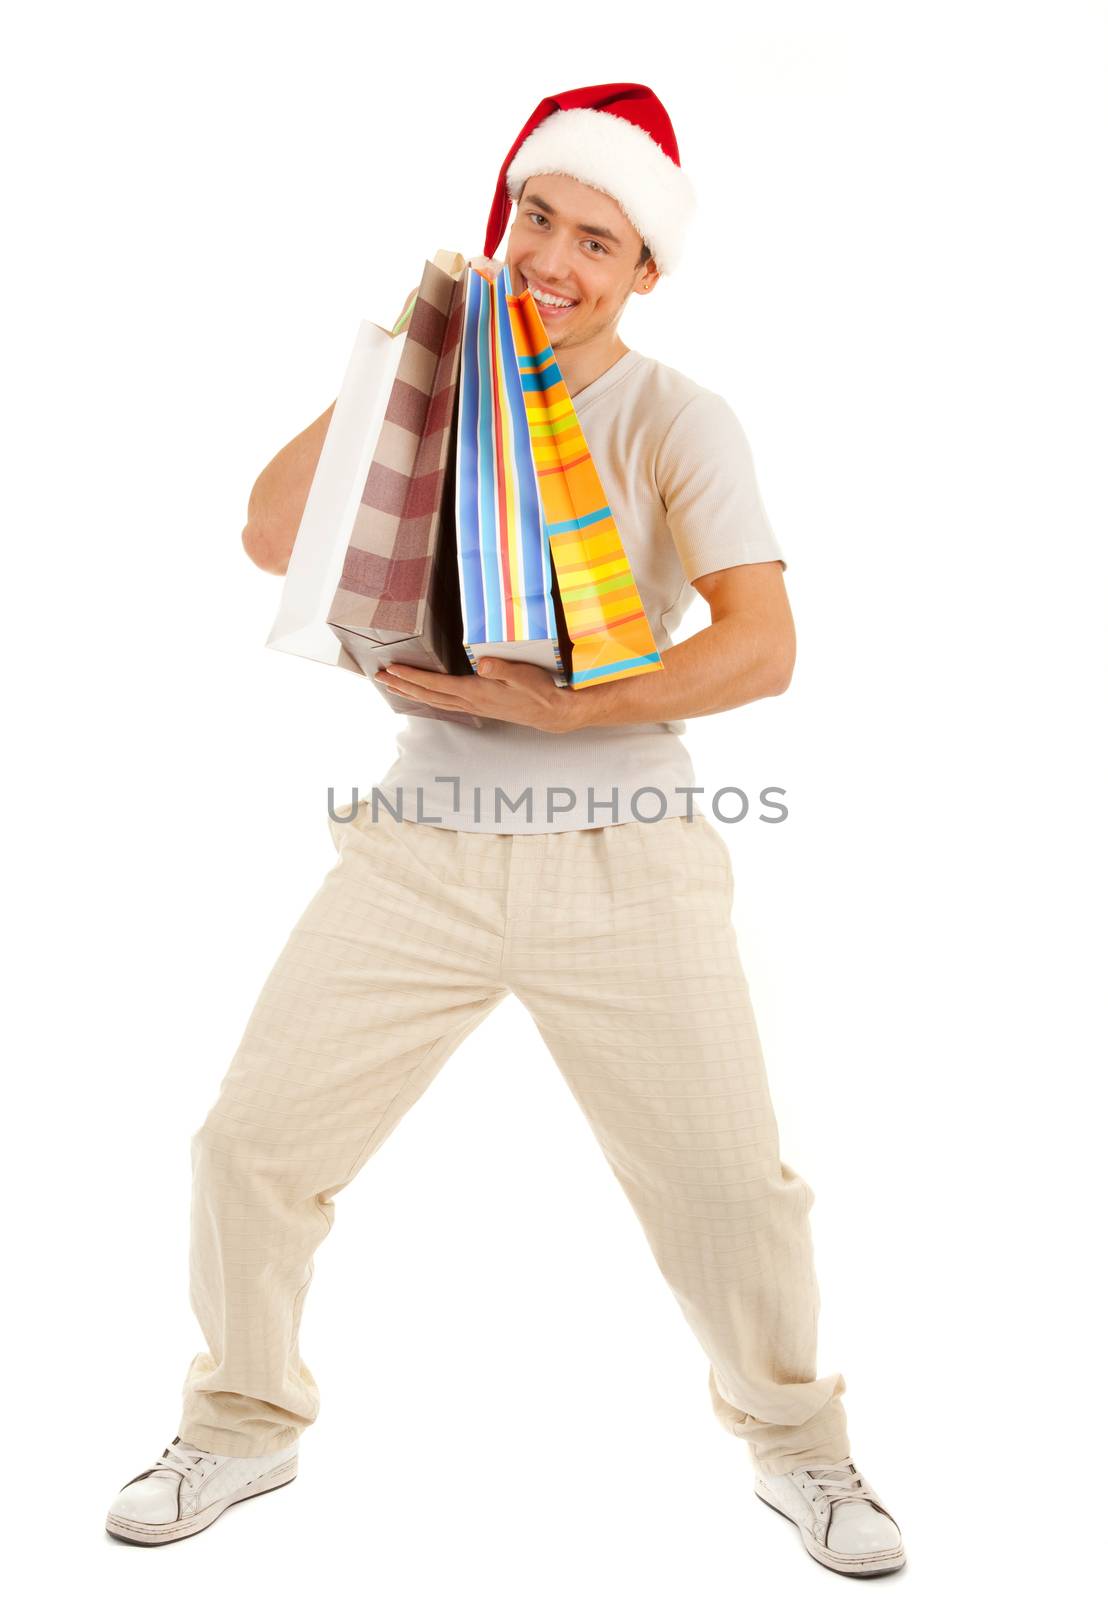 Young Santa with heavy purchases in paper bags on white background